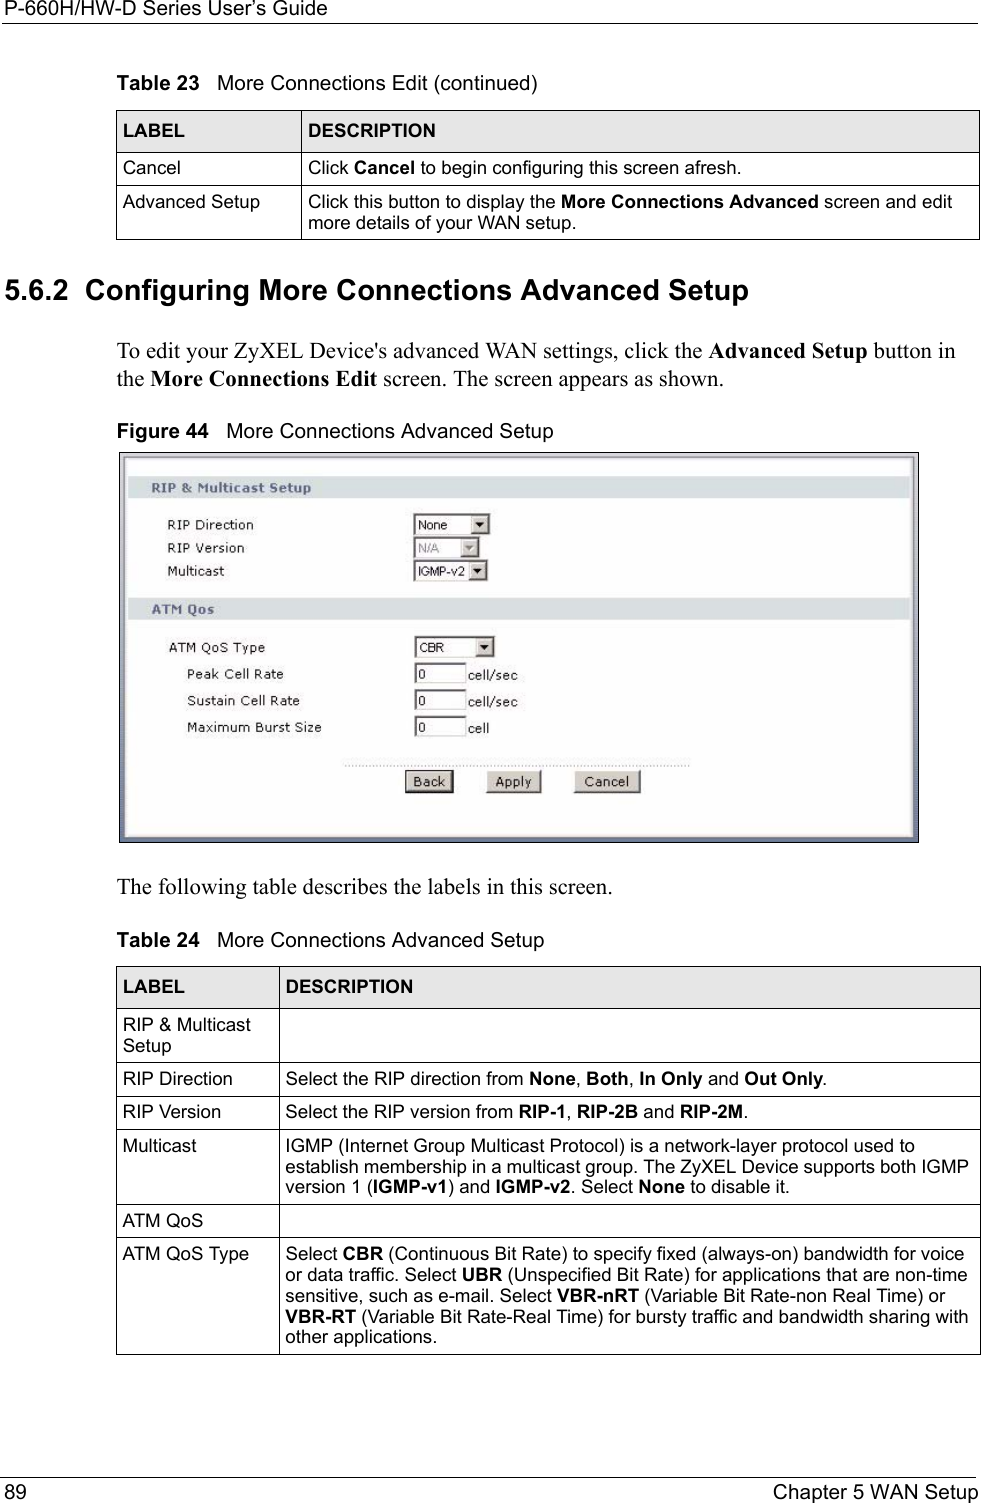 P-660H/HW-D Series User’s Guide89 Chapter 5 WAN Setup5.6.2  Configuring More Connections Advanced Setup  To edit your ZyXEL Device&apos;s advanced WAN settings, click the Advanced Setup button in the More Connections Edit screen. The screen appears as shown.Figure 44   More Connections Advanced SetupThe following table describes the labels in this screen.  Cancel Click Cancel to begin configuring this screen afresh.Advanced Setup Click this button to display the More Connections Advanced screen and edit more details of your WAN setup.Table 23   More Connections Edit (continued)LABEL DESCRIPTIONTable 24   More Connections Advanced SetupLABEL DESCRIPTIONRIP &amp; Multicast SetupRIP Direction Select the RIP direction from None, Both, In Only and Out Only.RIP Version Select the RIP version from RIP-1, RIP-2B and RIP-2M.Multicast IGMP (Internet Group Multicast Protocol) is a network-layer protocol used to establish membership in a multicast group. The ZyXEL Device supports both IGMP version 1 (IGMP-v1) and IGMP-v2. Select None to disable it.ATM QoSATM QoS Type Select CBR (Continuous Bit Rate) to specify fixed (always-on) bandwidth for voice or data traffic. Select UBR (Unspecified Bit Rate) for applications that are non-time sensitive, such as e-mail. Select VBR-nRT (Variable Bit Rate-non Real Time) or VBR-RT (Variable Bit Rate-Real Time) for bursty traffic and bandwidth sharing with other applications. 